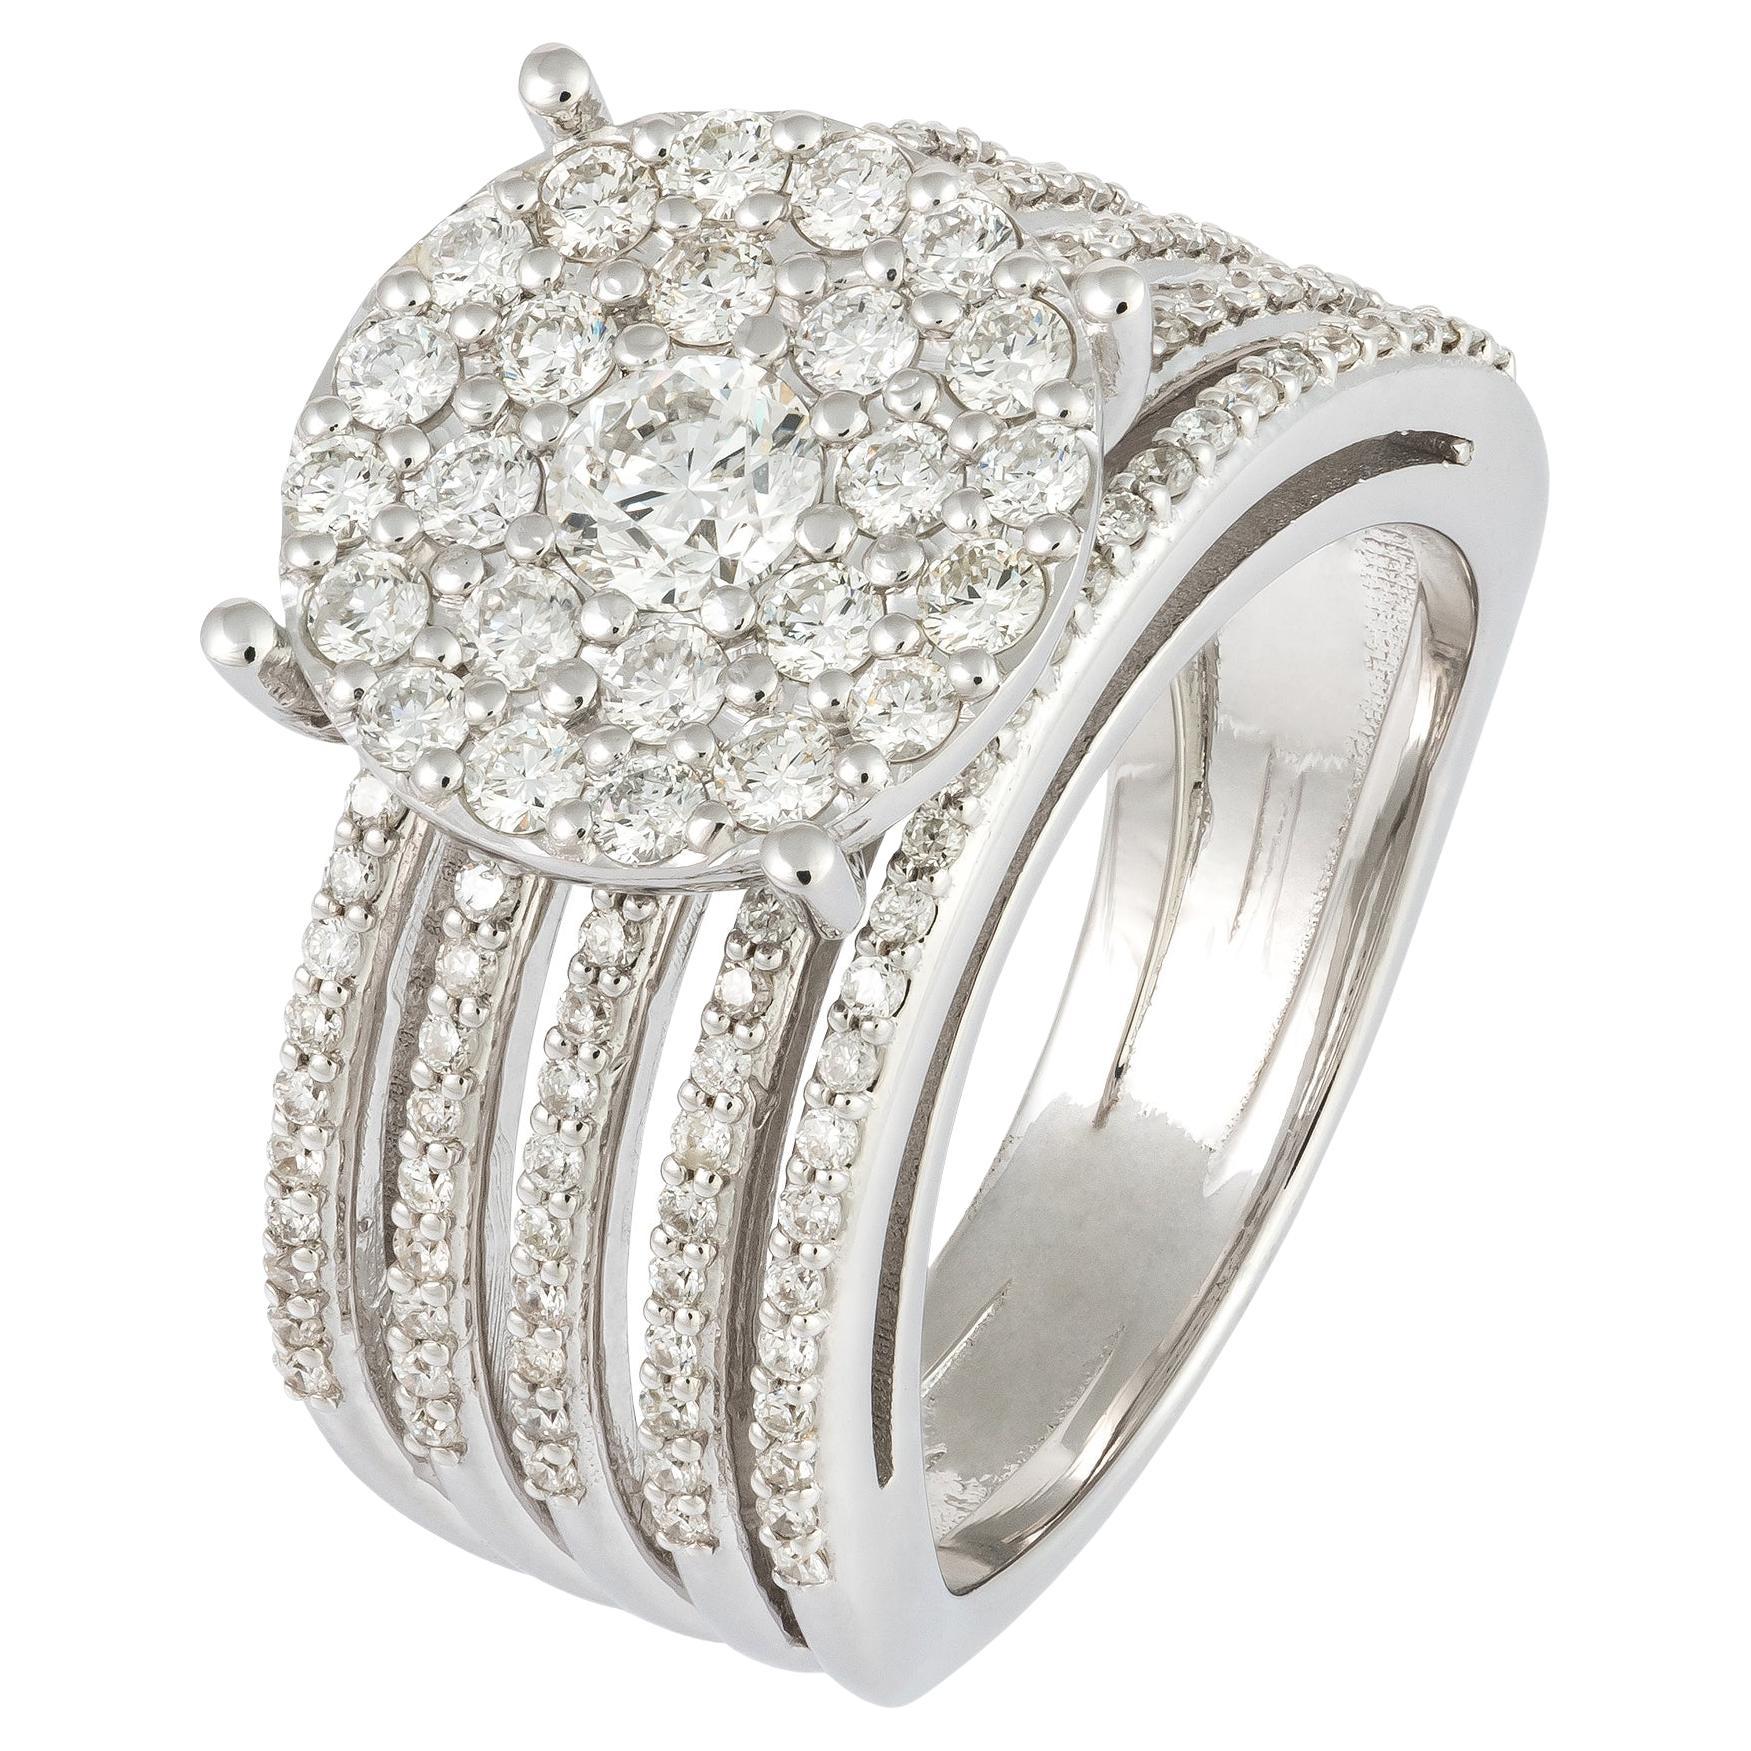 For Sale:  Statement White 18K Gold White Diamond Ring for Her